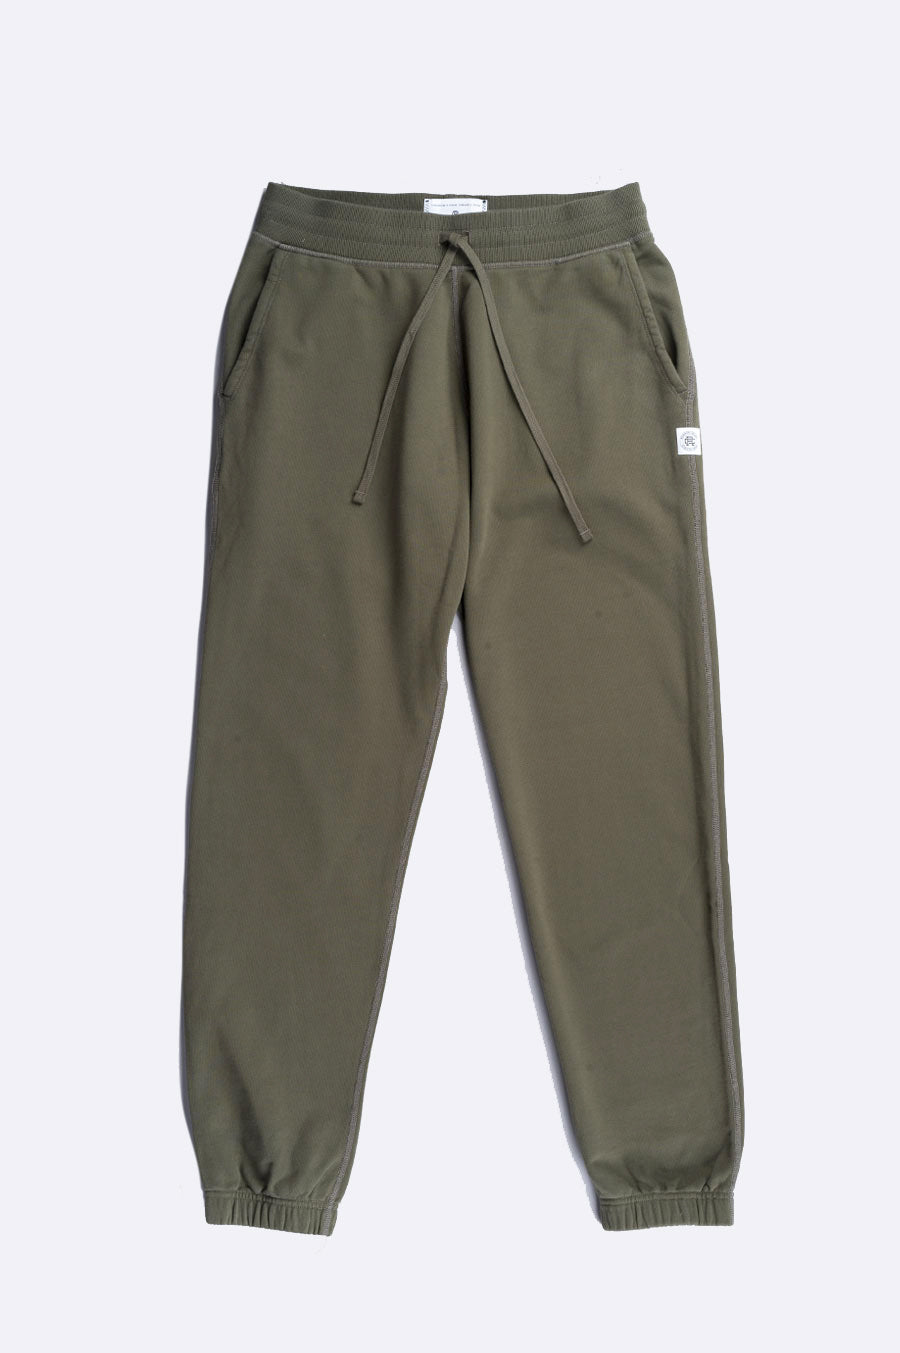 REIGNING CHAMP KNIT MIDWEIGHT TERRY CUFFED SWEATPANT FIR